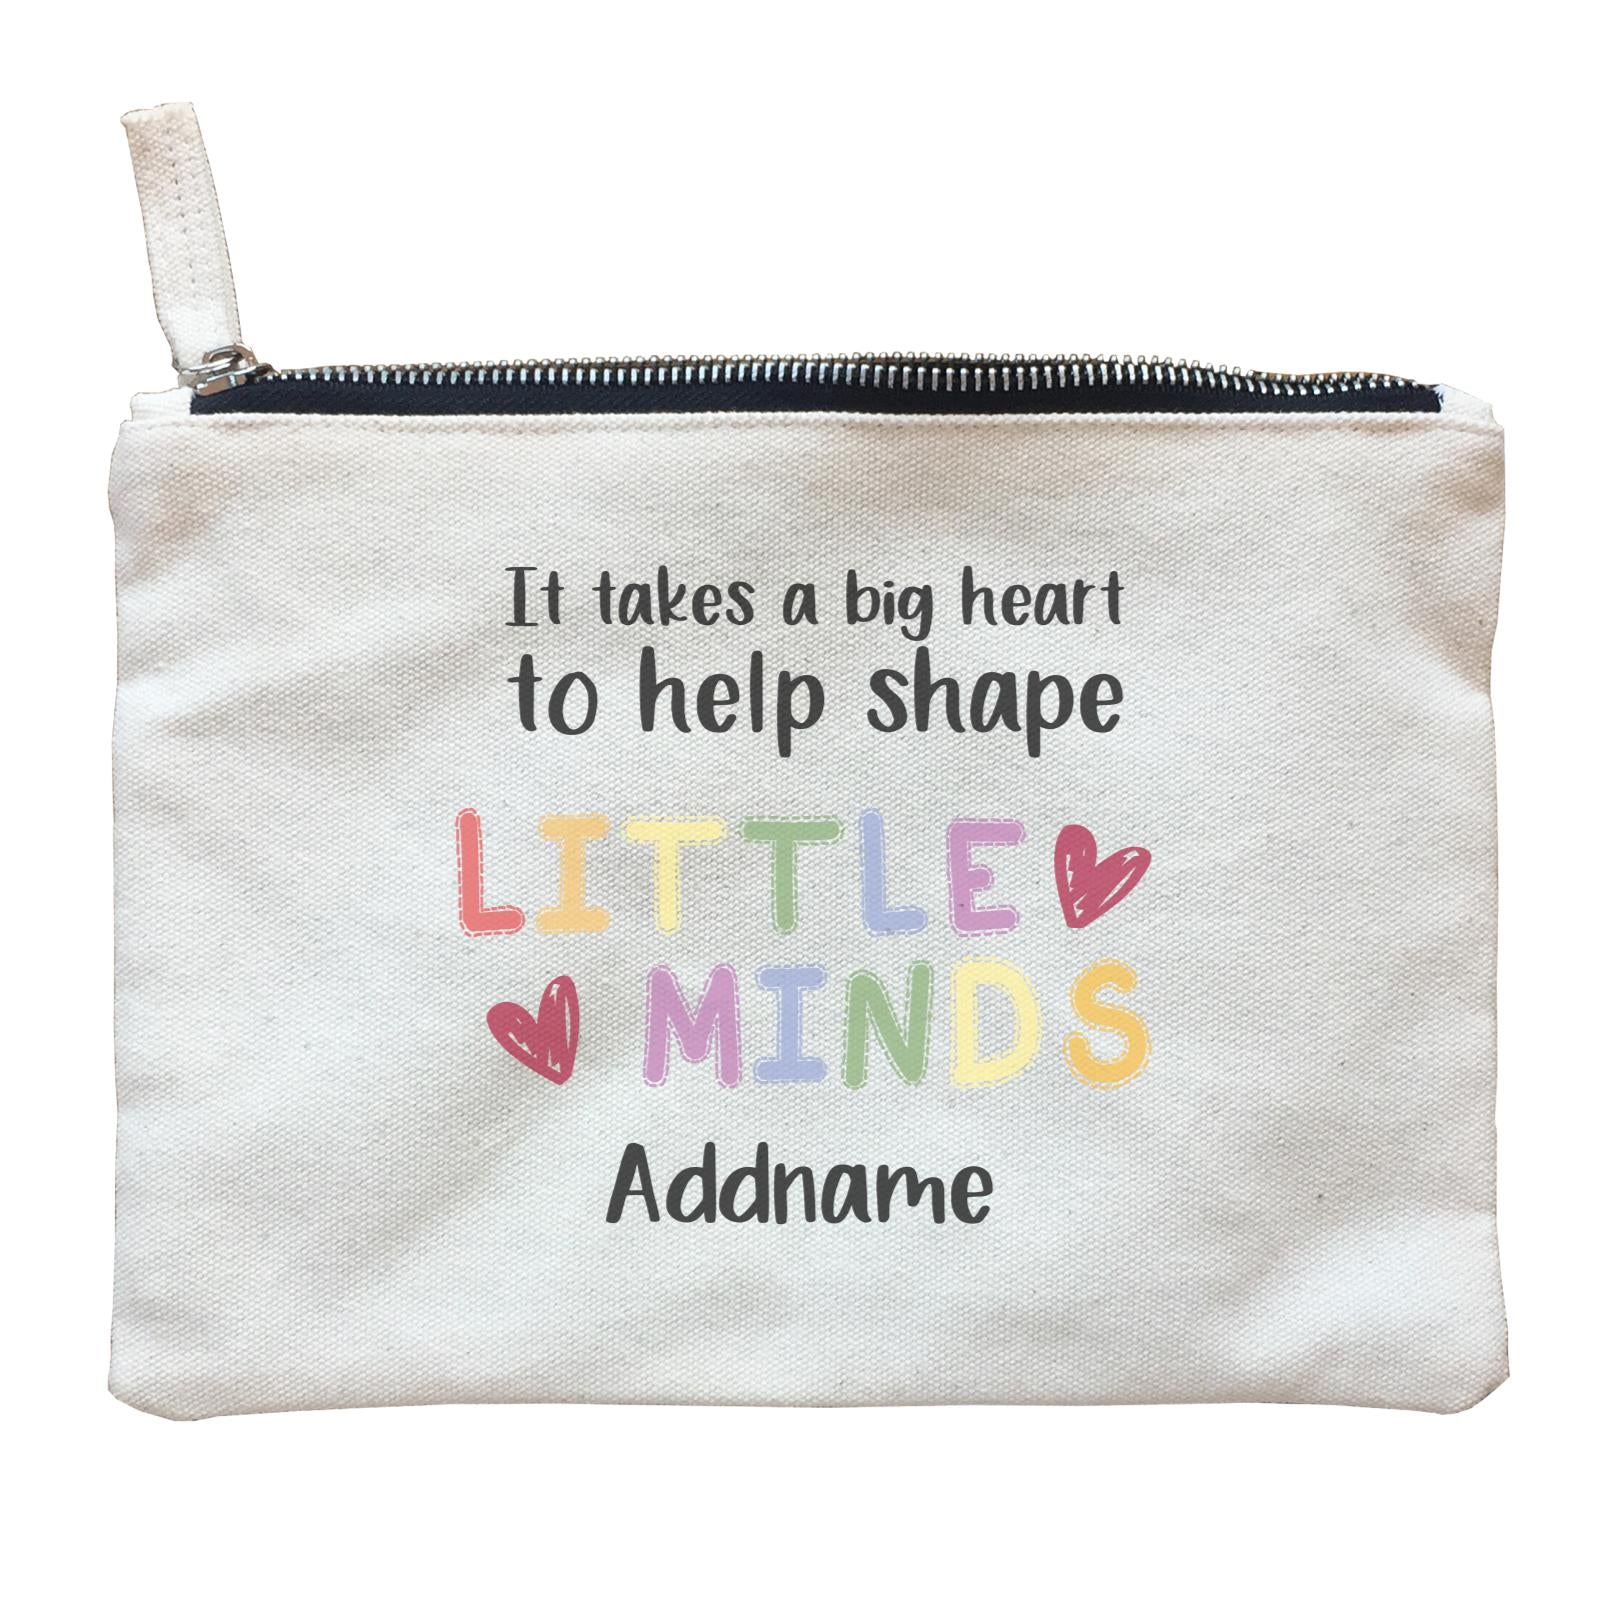 Teacher Quotes 2 It Takes A Big Heart To Help Shape Little Minds Addname Zipper Pouch